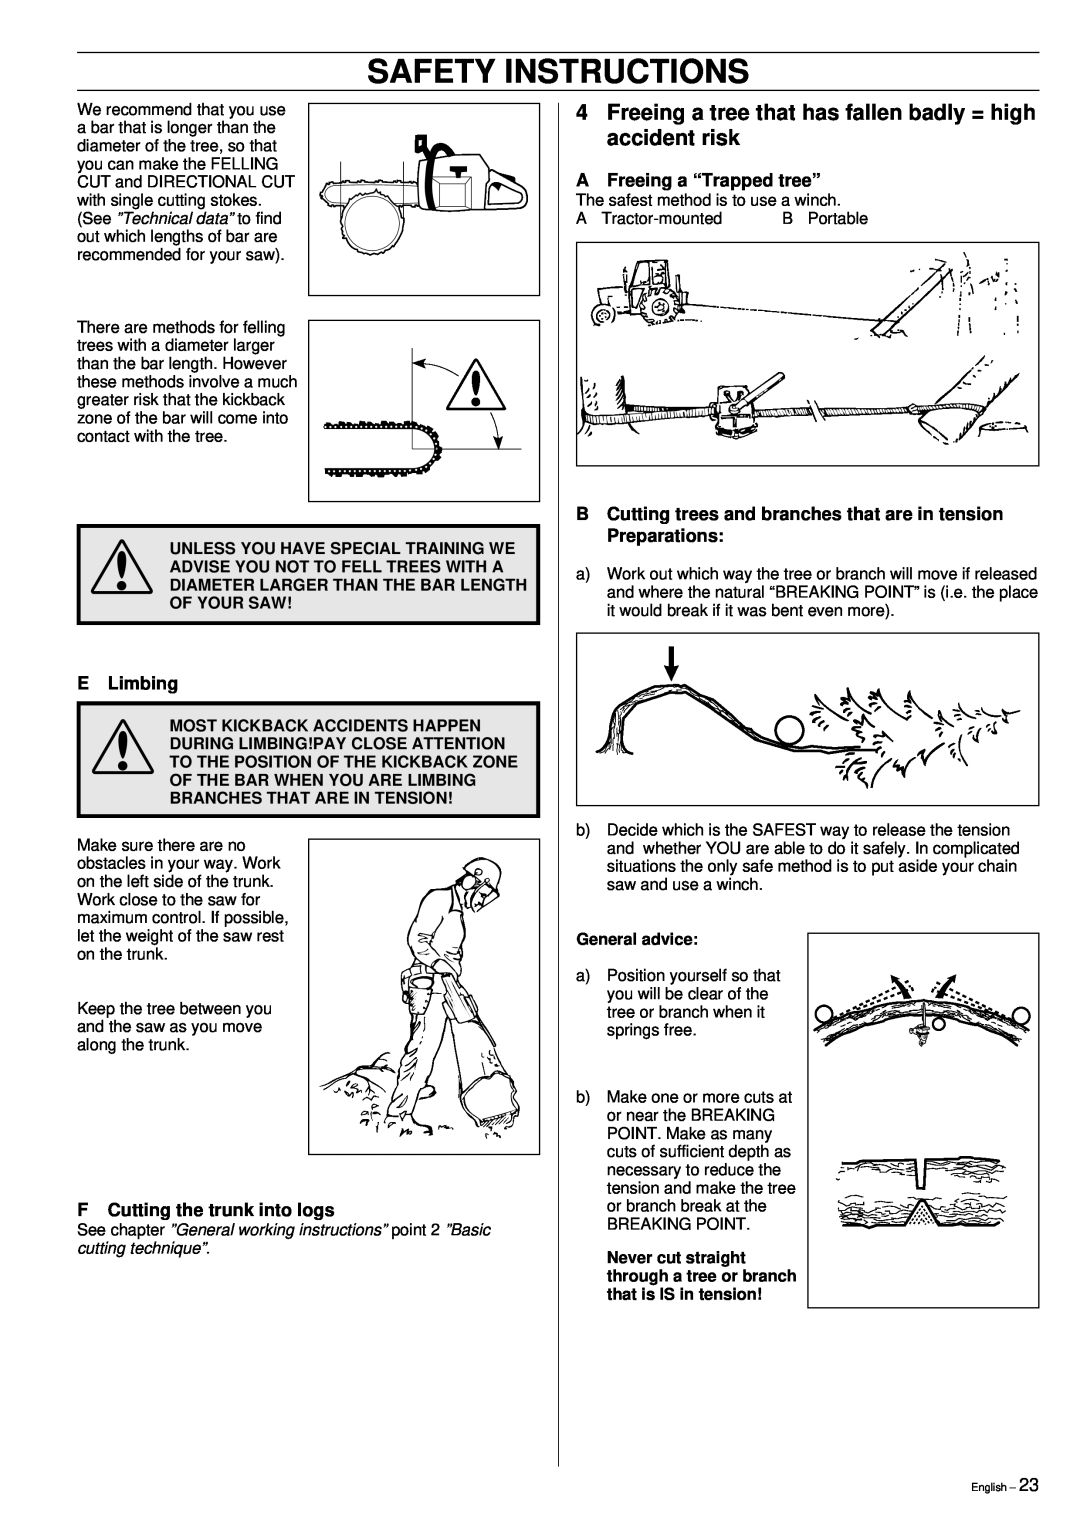 Husqvarna 51 manual Safety Instructions, E Limbing, F Cutting the trunk into logs, AFreeing a “Trapped tree” 